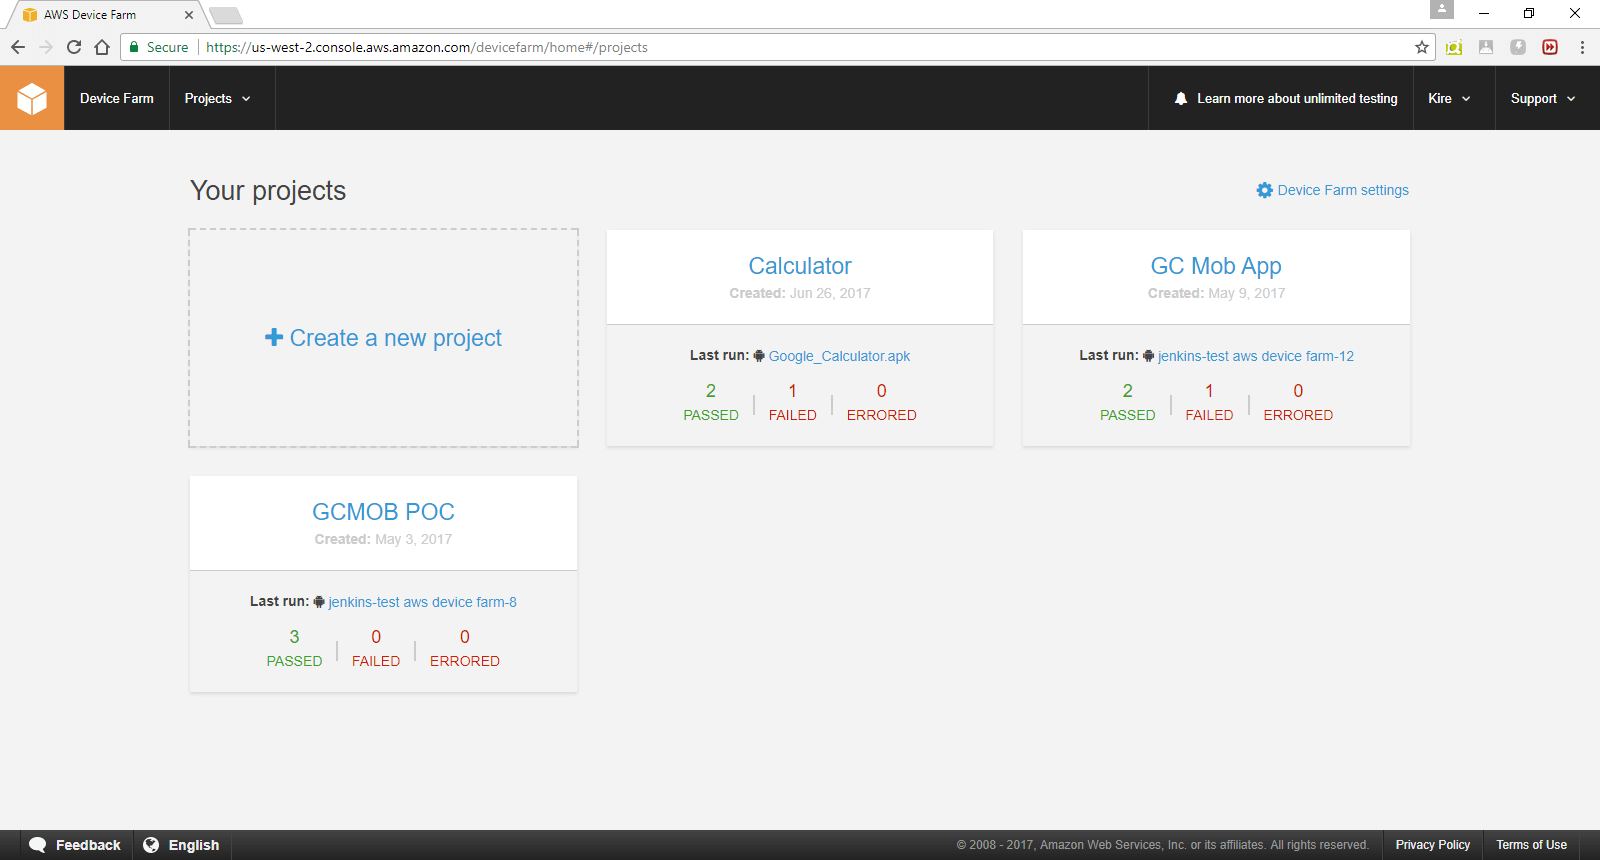 AWS device farm interface after logging in